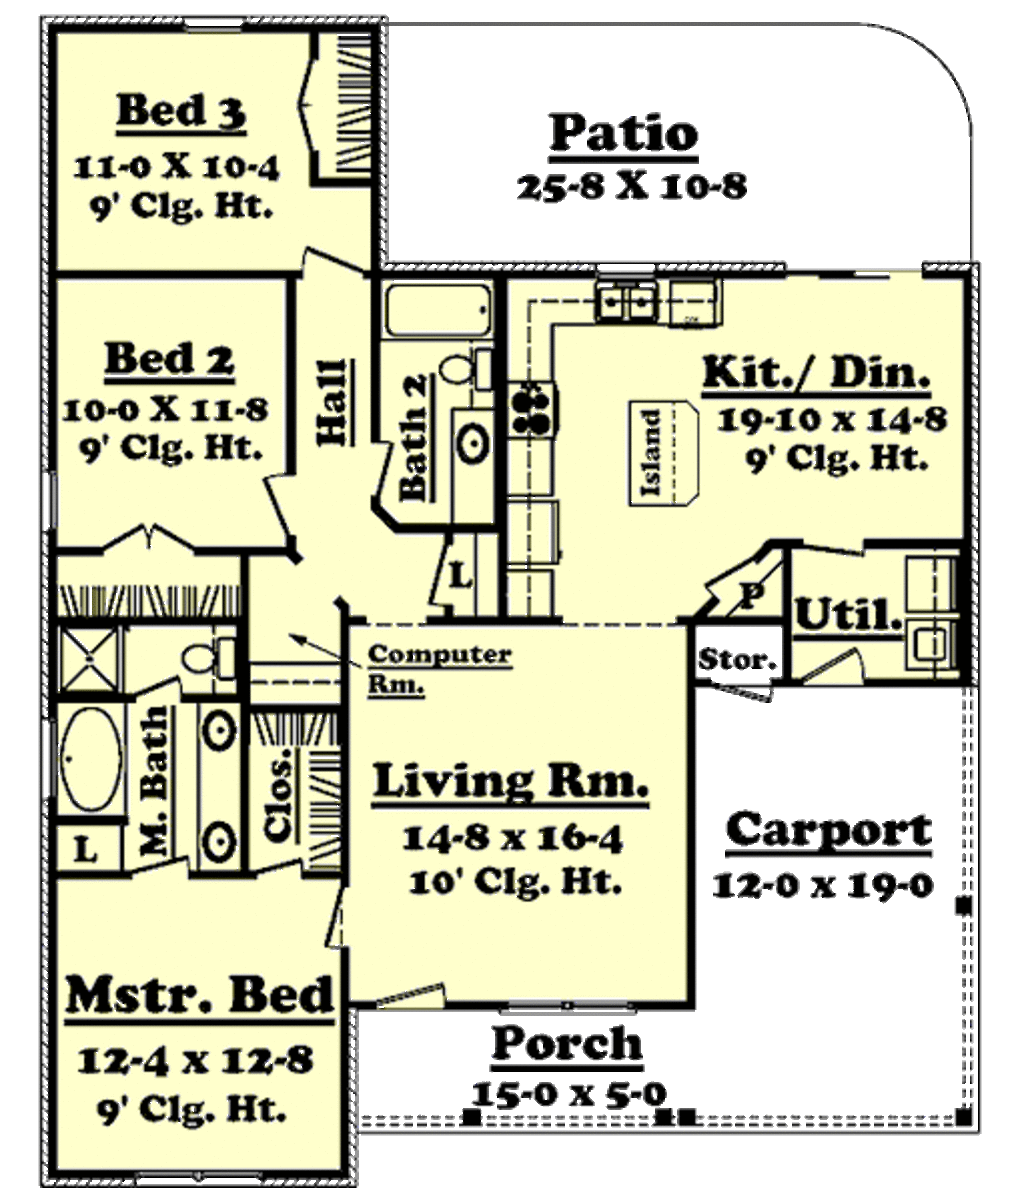 Country Style House Plan 3 Beds 2 Baths 1350 Sq Ft Plan 430 6 Eplans Com